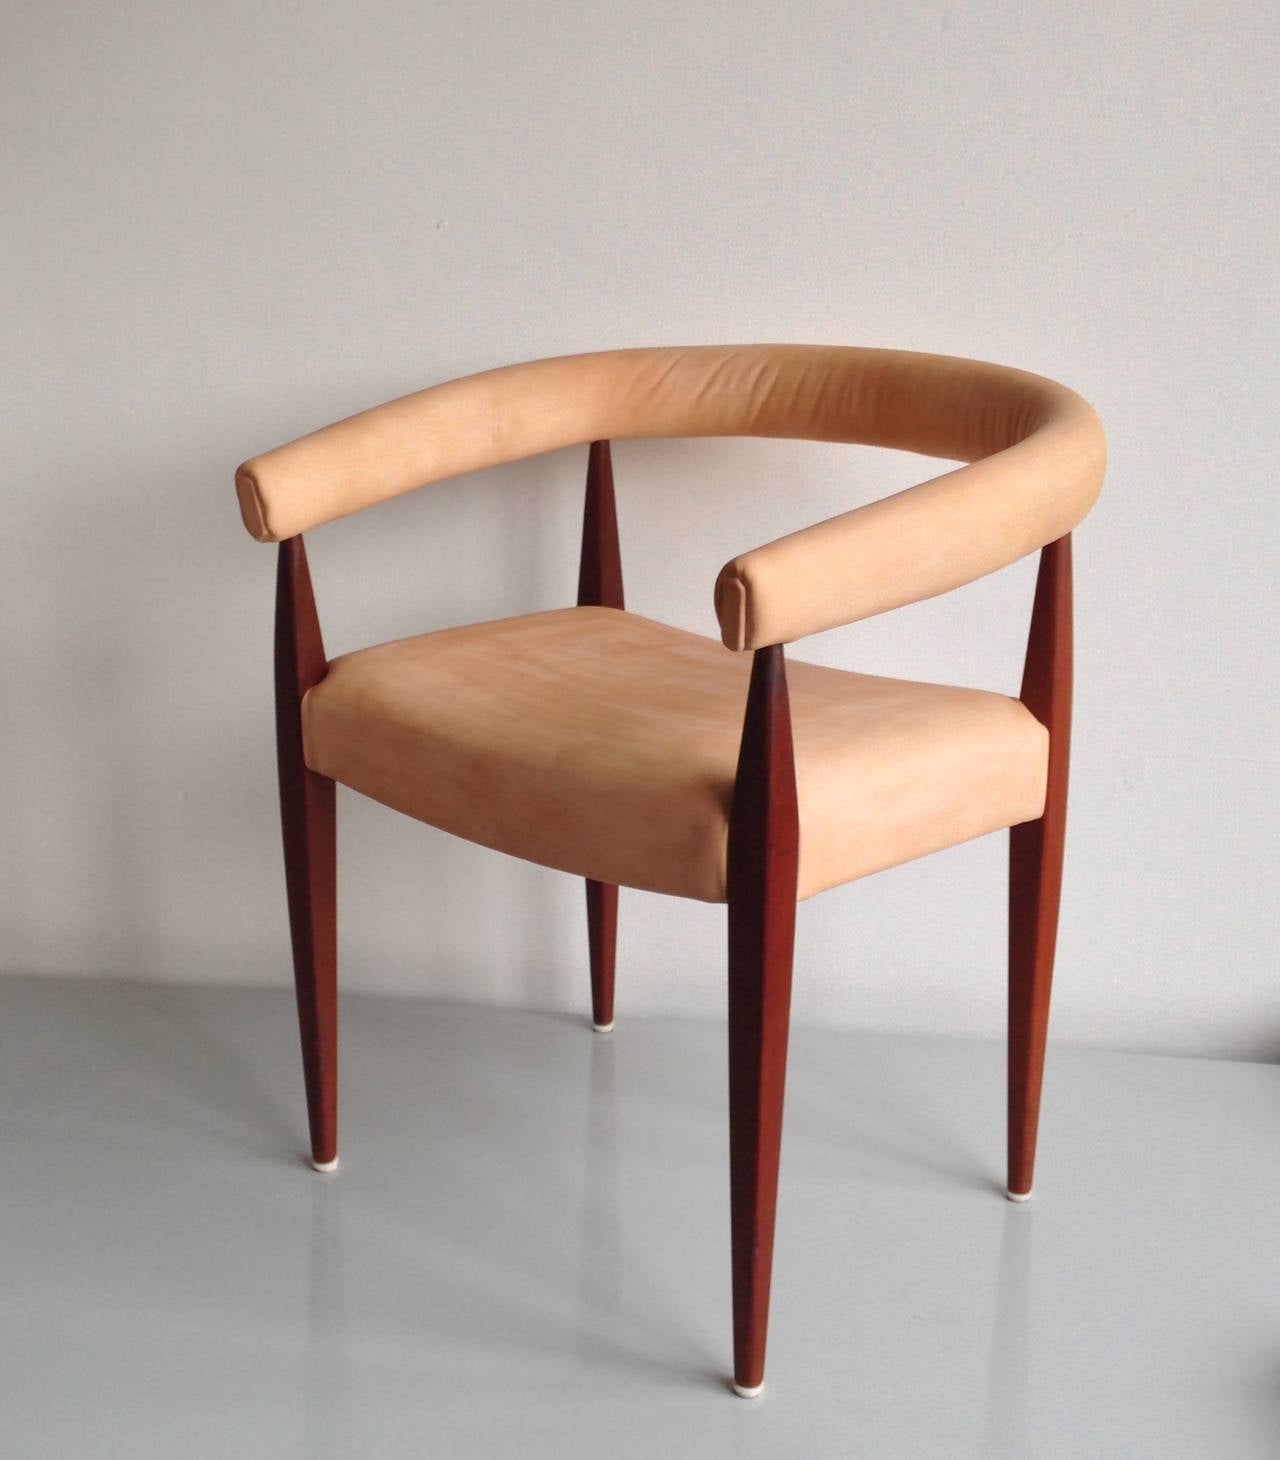 Nanna Ditzel (1923 - 2005)

Solid Teak Armchair No. 114? - Poul Kolds Savvaerk, Denmark. Designed in 1955. Comparable Model as 113 but with Leather Armrest or with model FM 2611 the later produced 